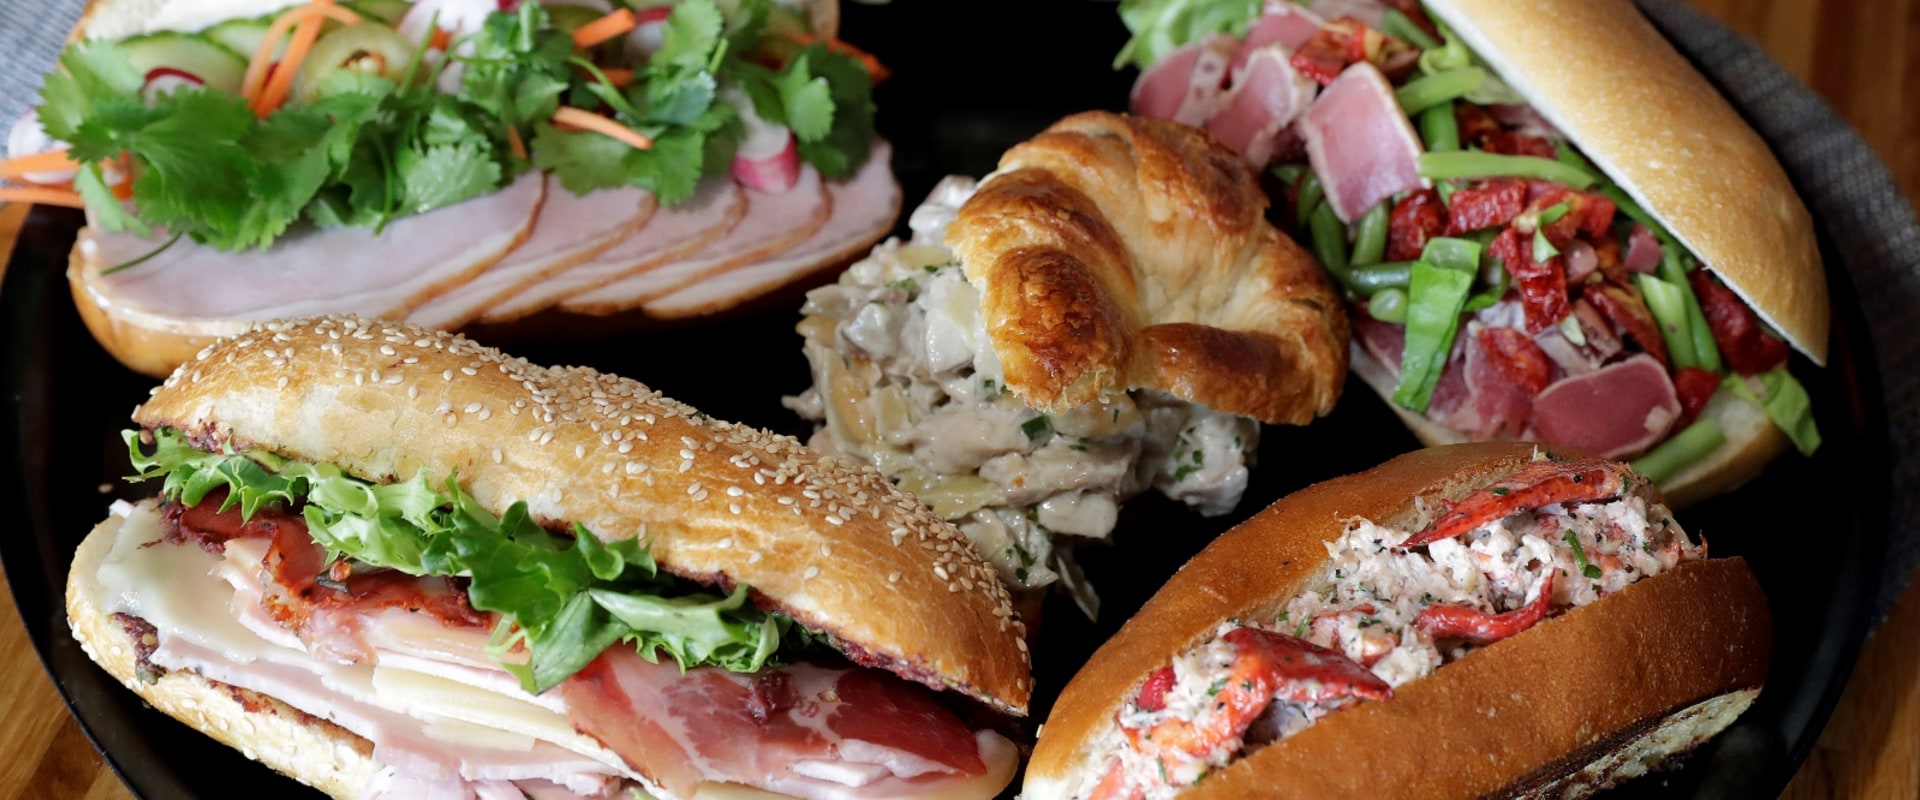 Sandwich Catering With Wild Game Recipes In Northern Virginia: A Must Try